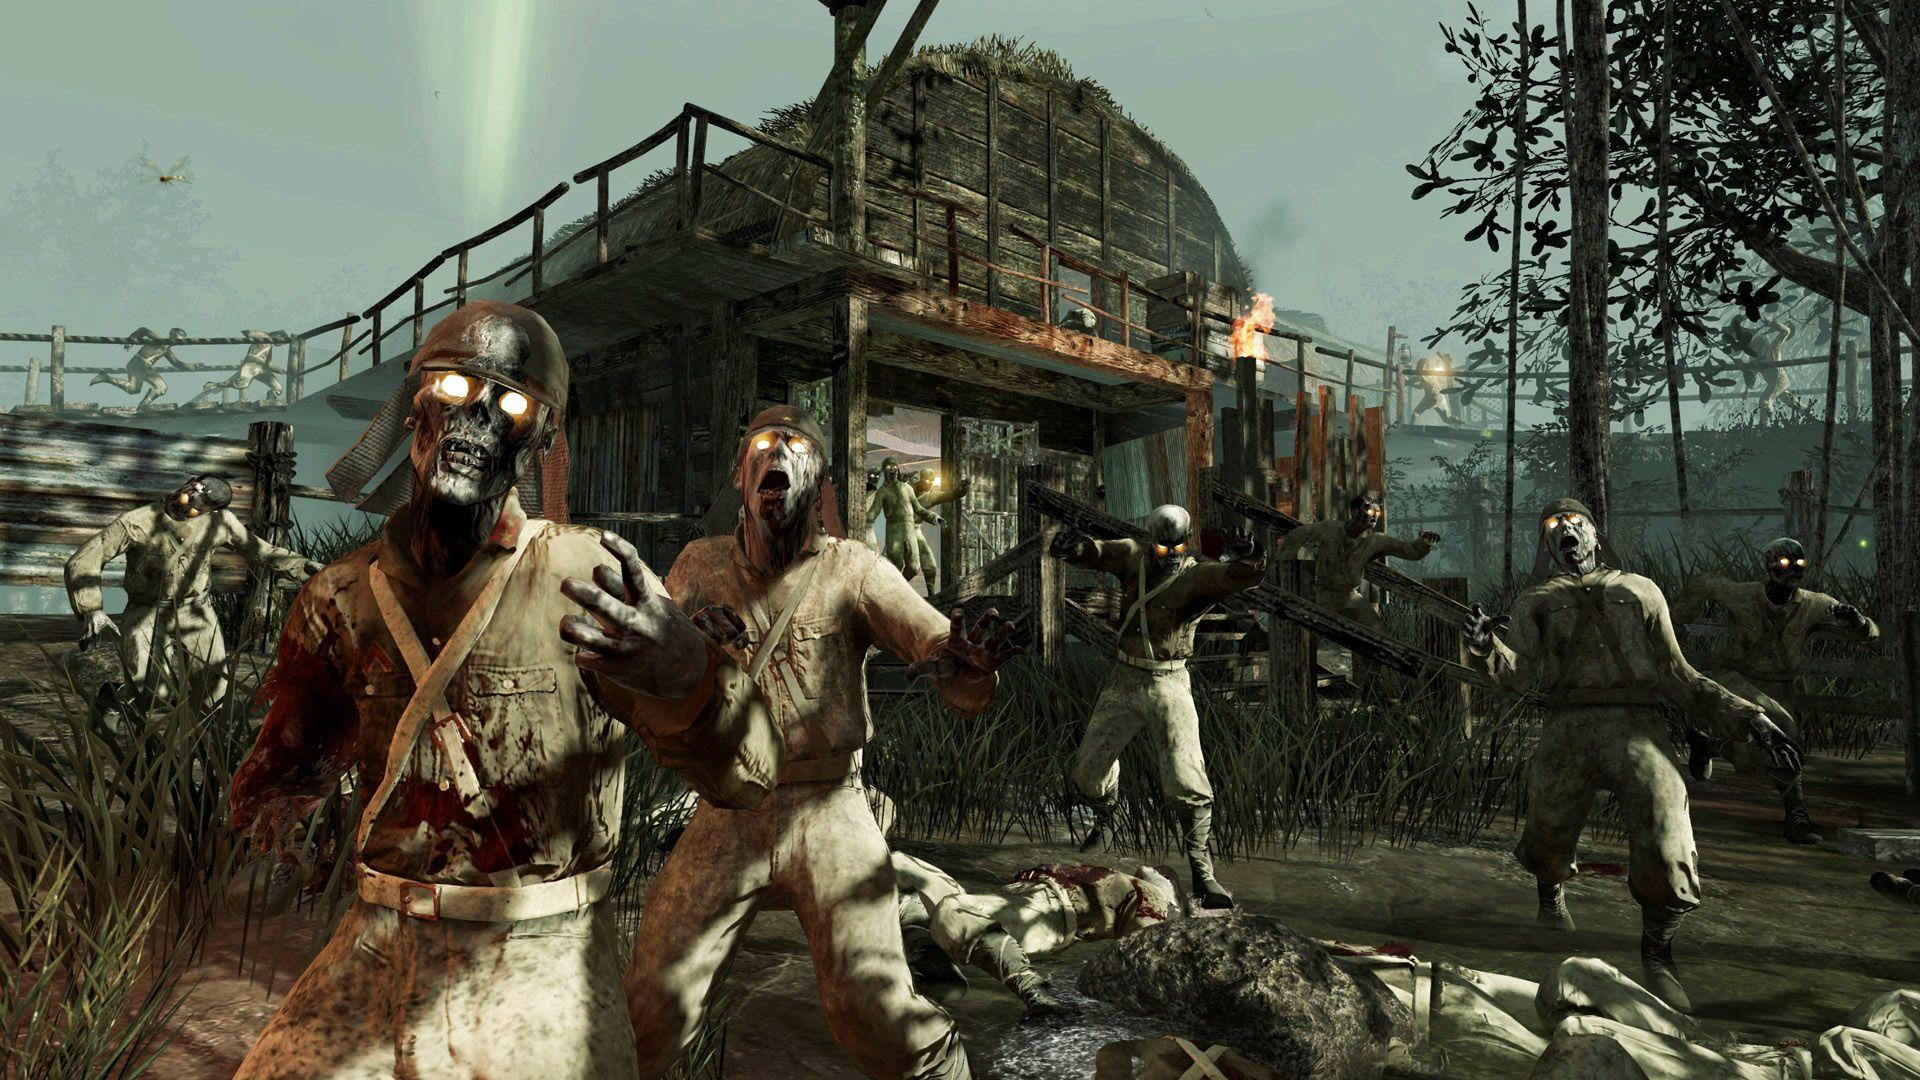 Call Of Duty Zombies Computer Wallpaper 9057 1920x1080 px